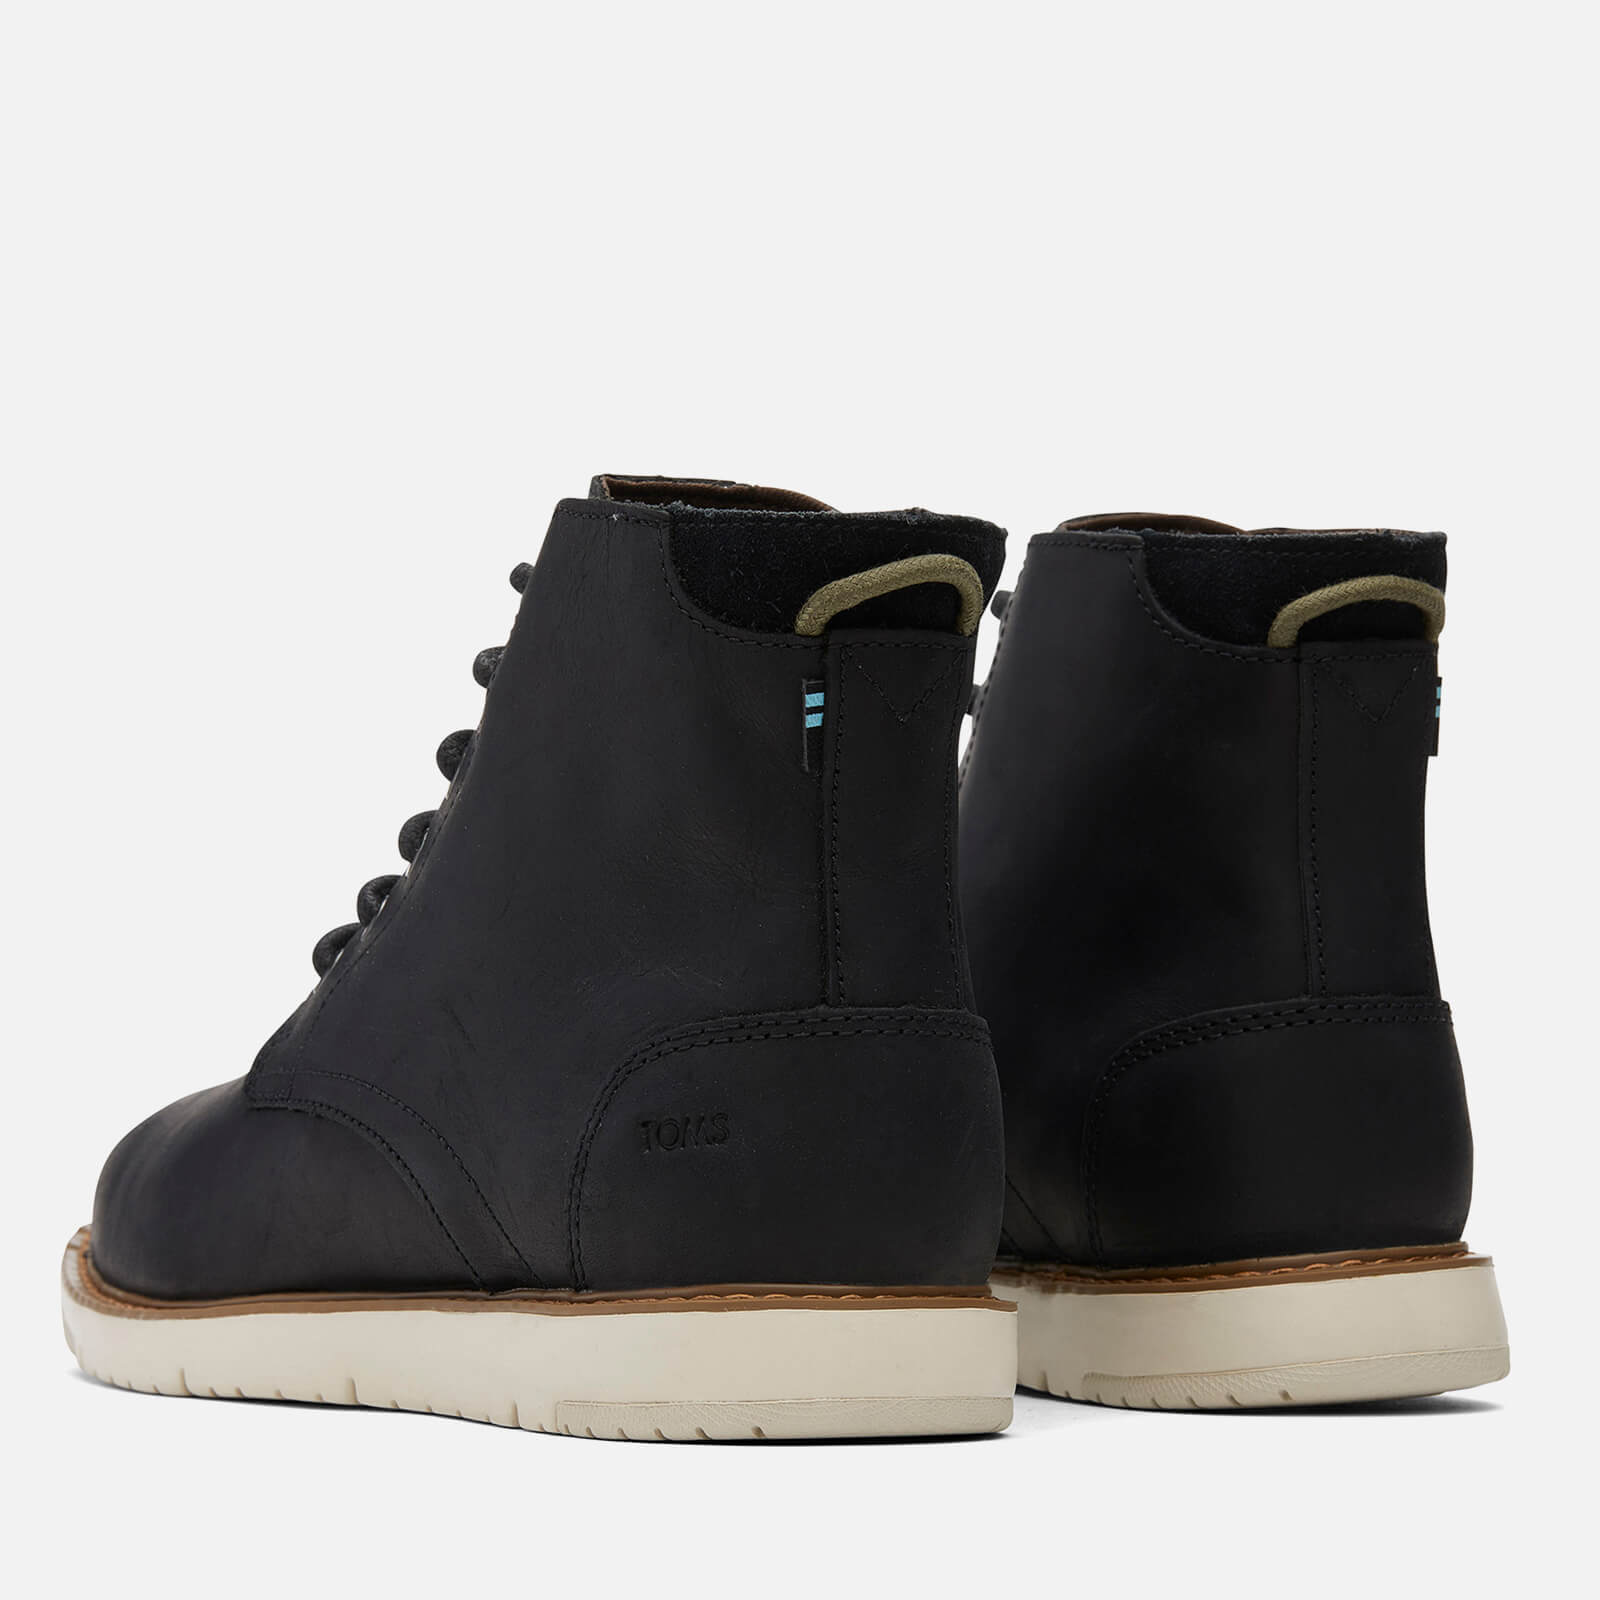 toms hillside water resistant leather boots - uk 7